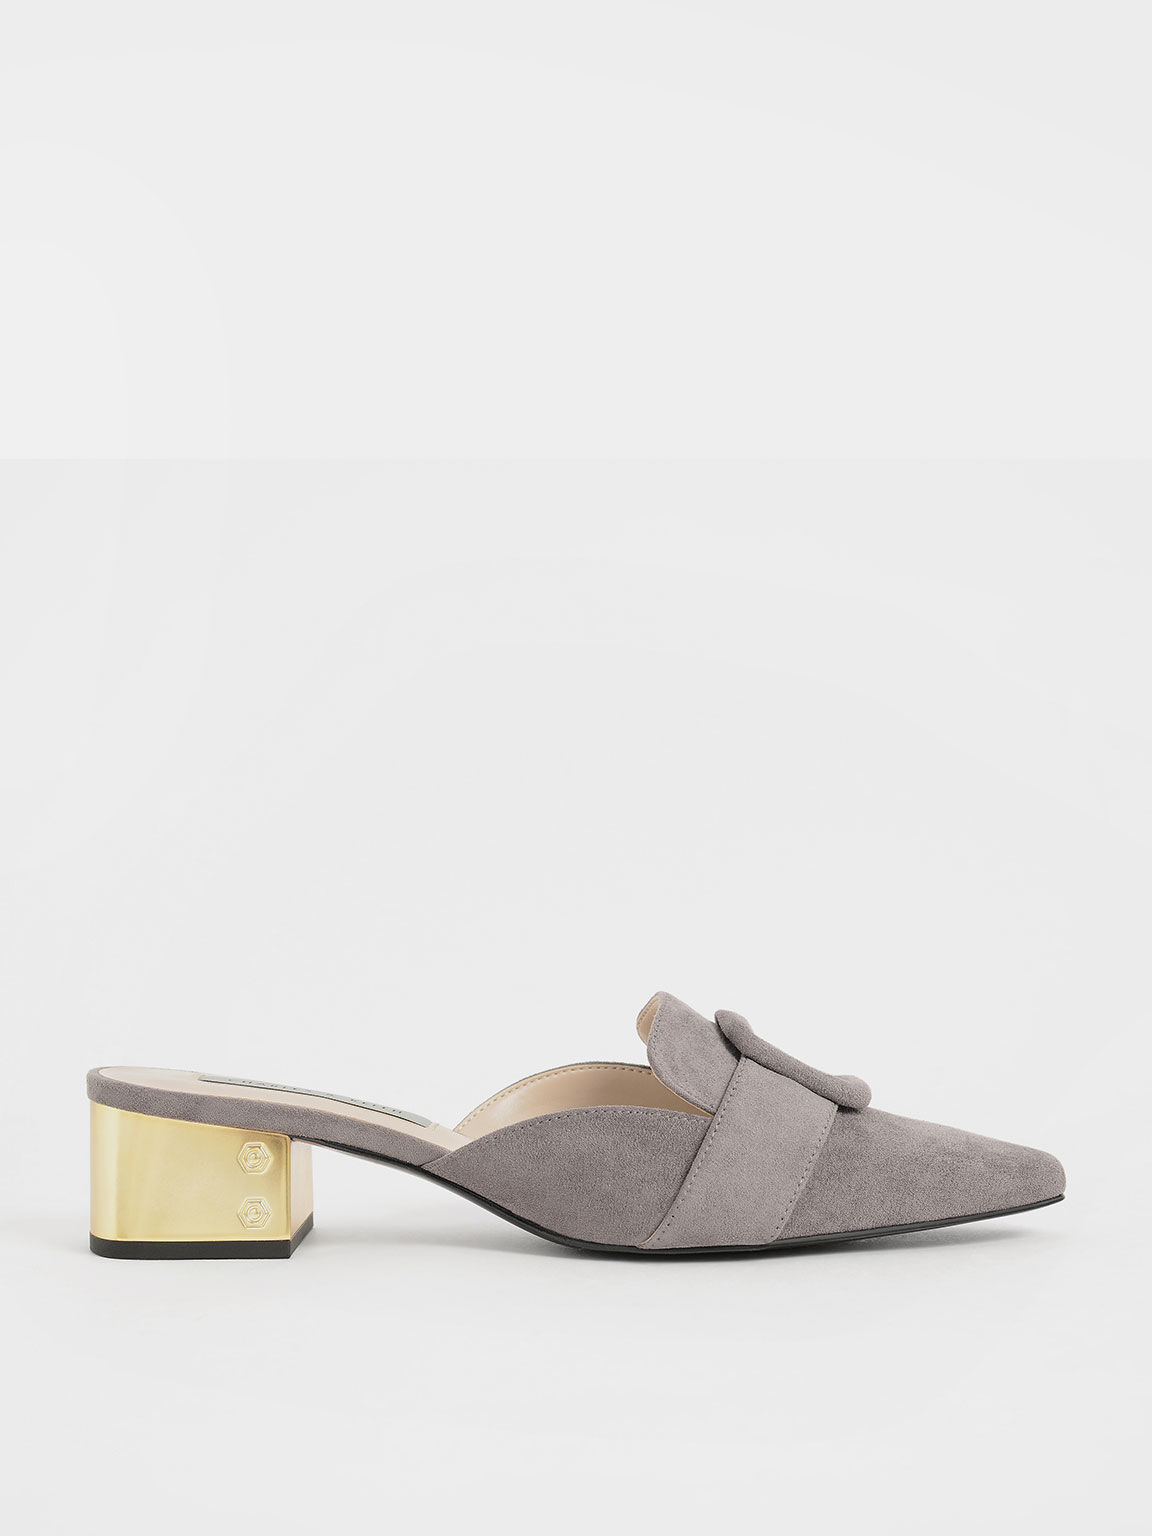 Textured Buckled Mules, Grey, hi-res